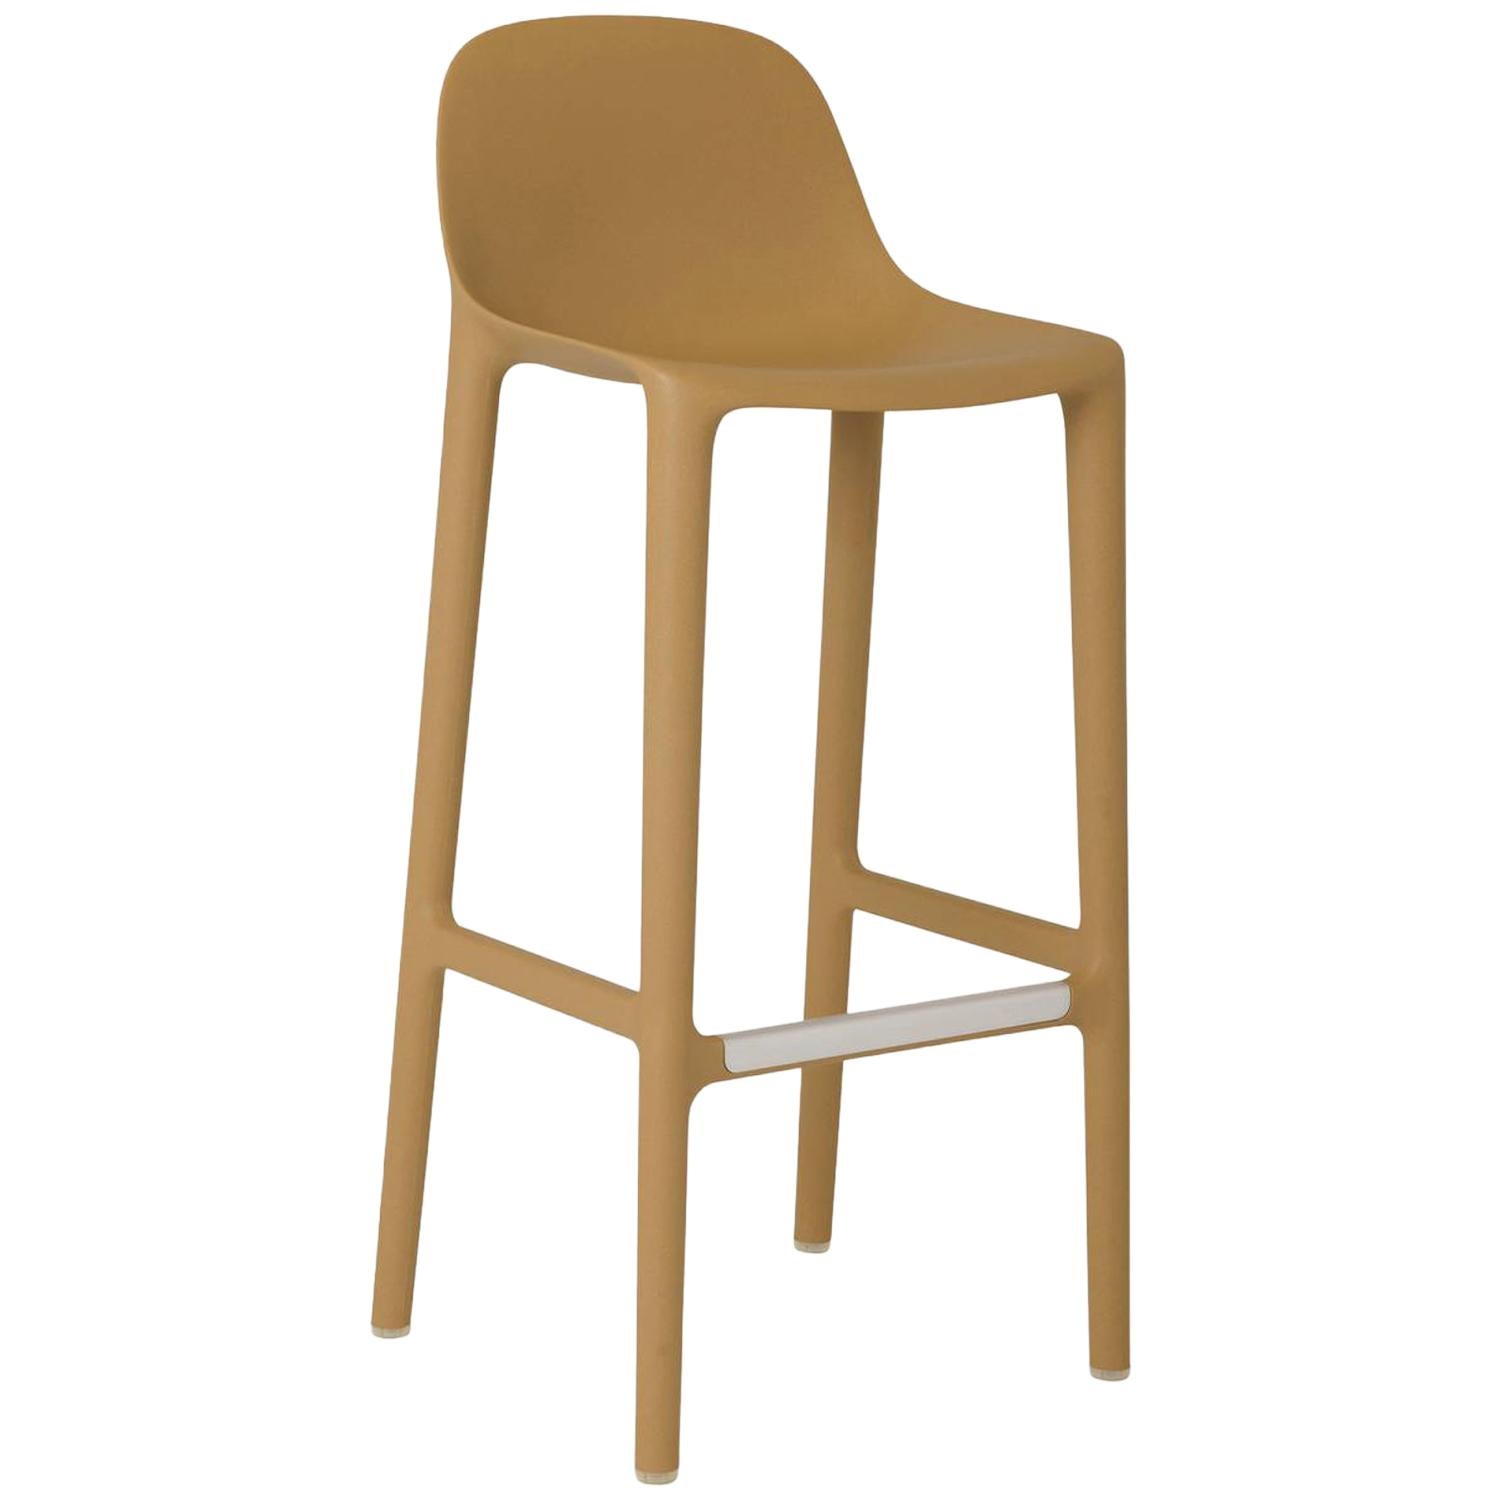 Emeco Broom Barstool in Tan by Philippe Starck 